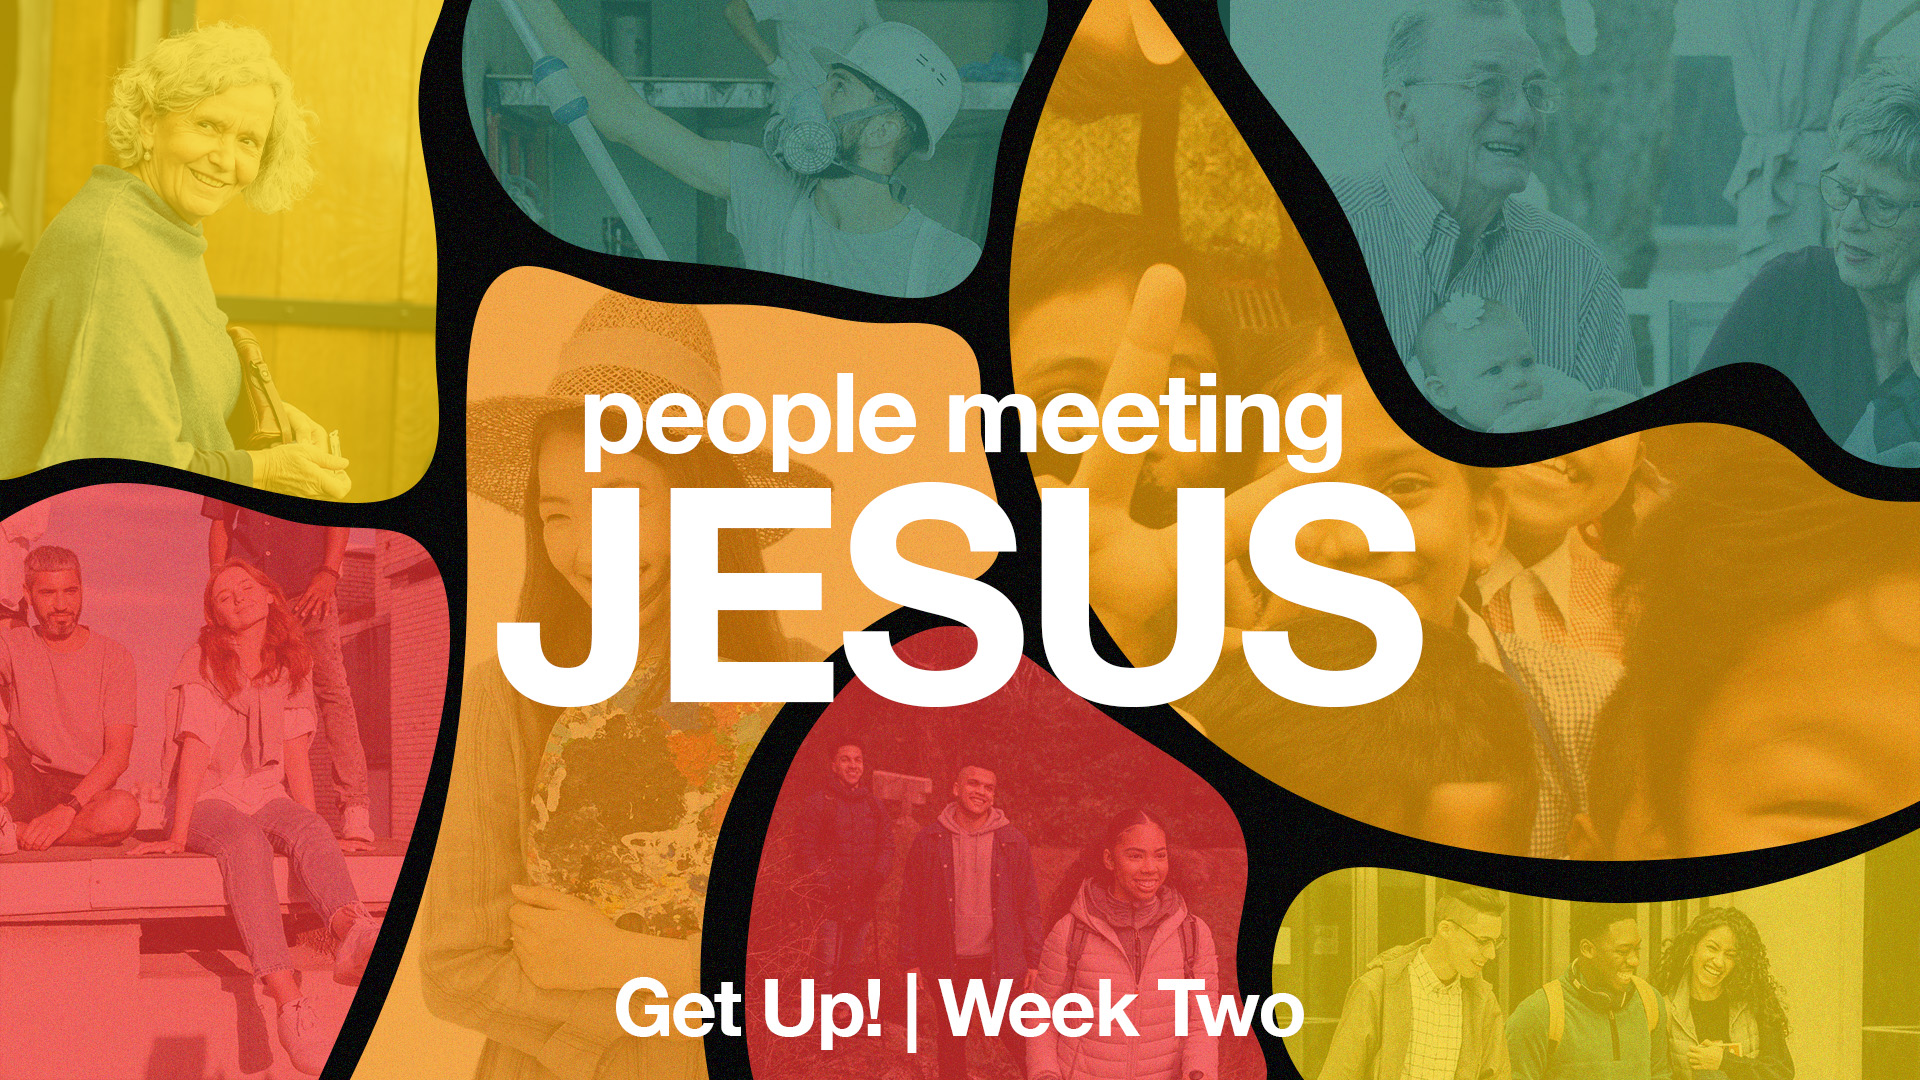 Easter Sunday | Get Up! - Week Two